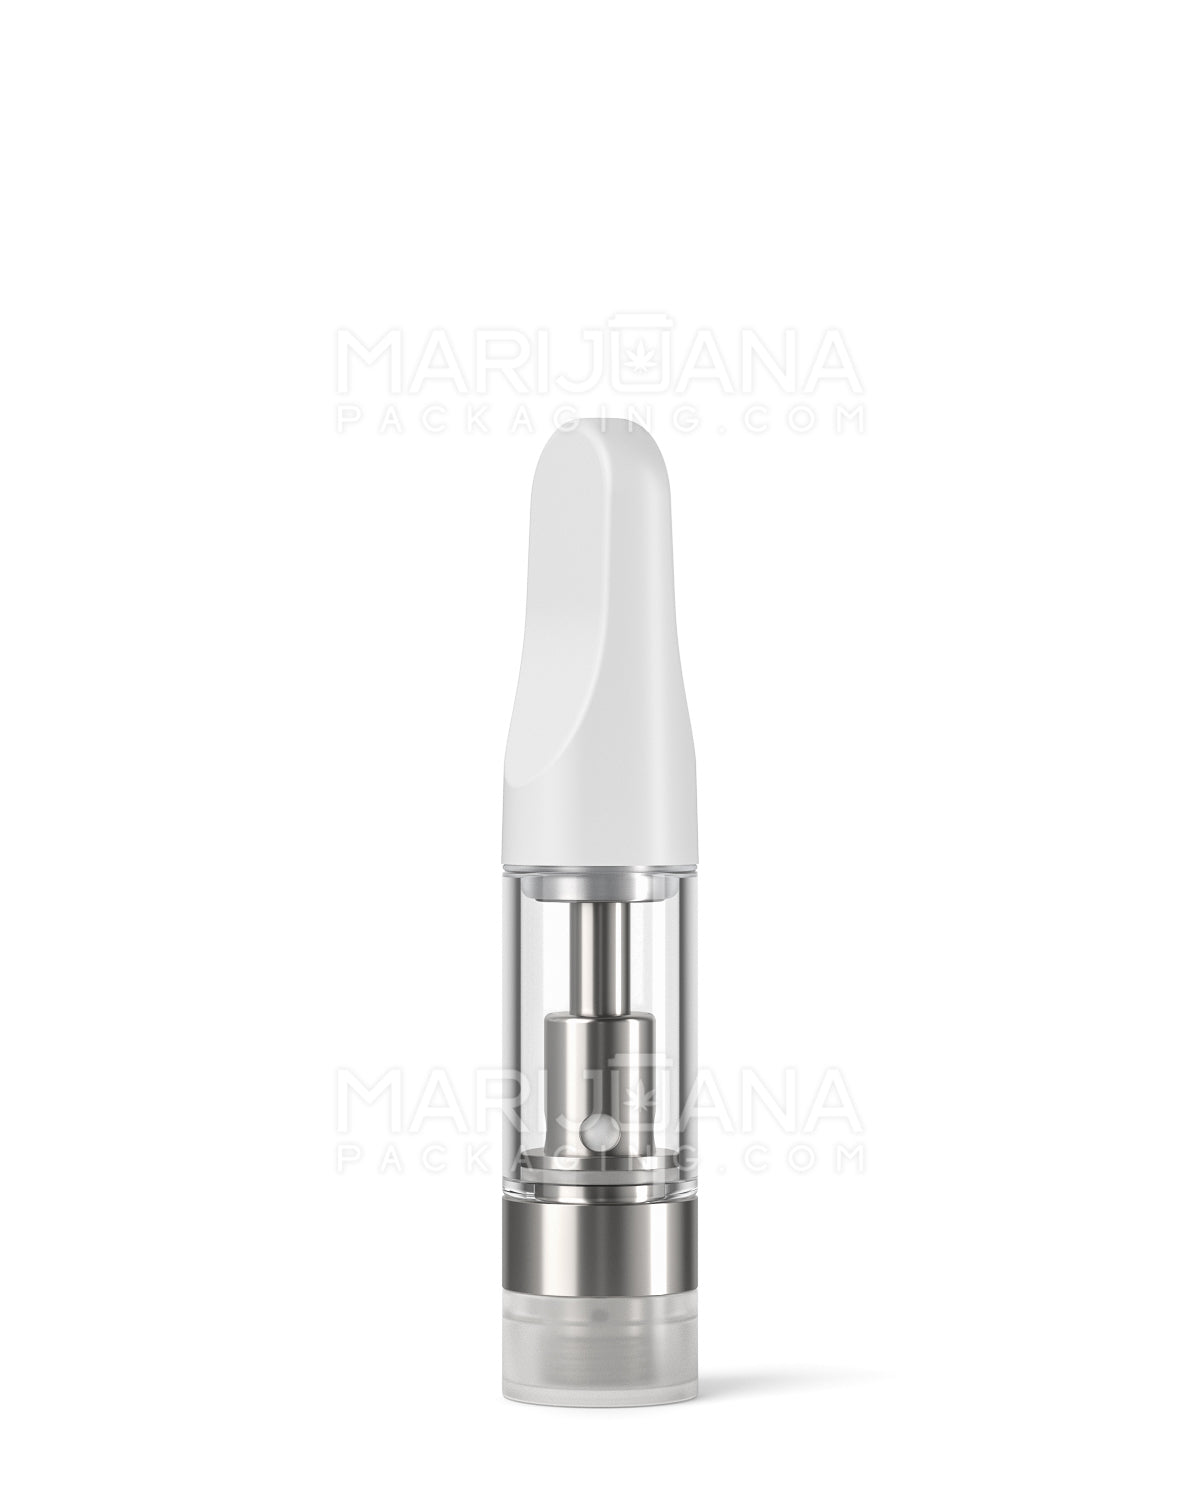 CCELL | Liquid6 Reactor Glass Vape Cartridge with White Plastic Mouthpiece | 0.5mL - Screw On - 100 Count - 3